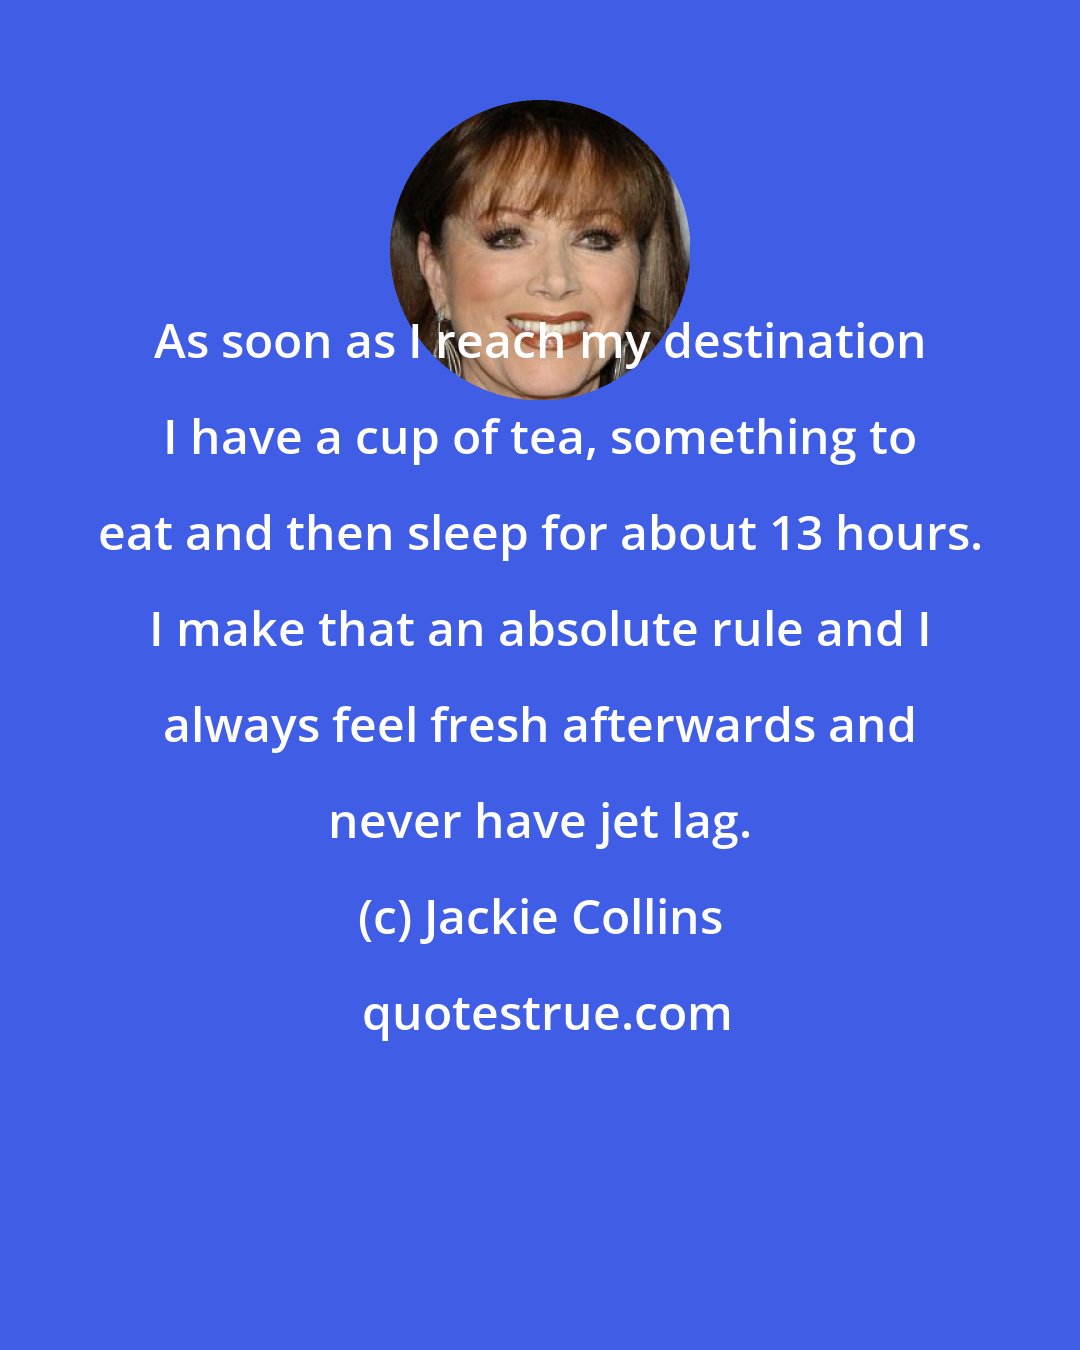 Jackie Collins: As soon as I reach my destination I have a cup of tea, something to eat and then sleep for about 13 hours. I make that an absolute rule and I always feel fresh afterwards and never have jet lag.